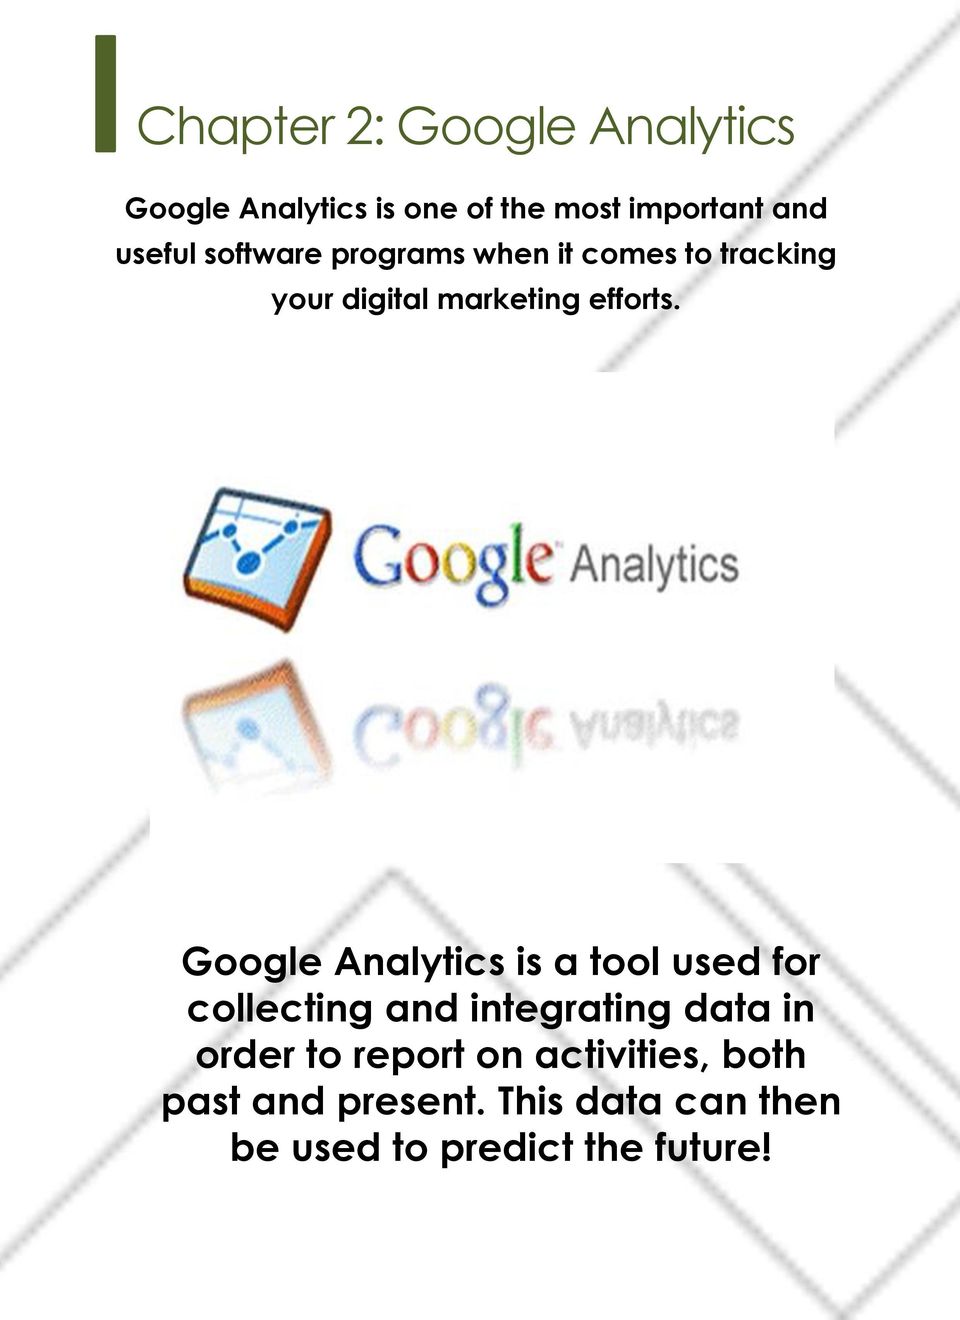 Google Analytics is a tool used for collecting and integrating data in order to